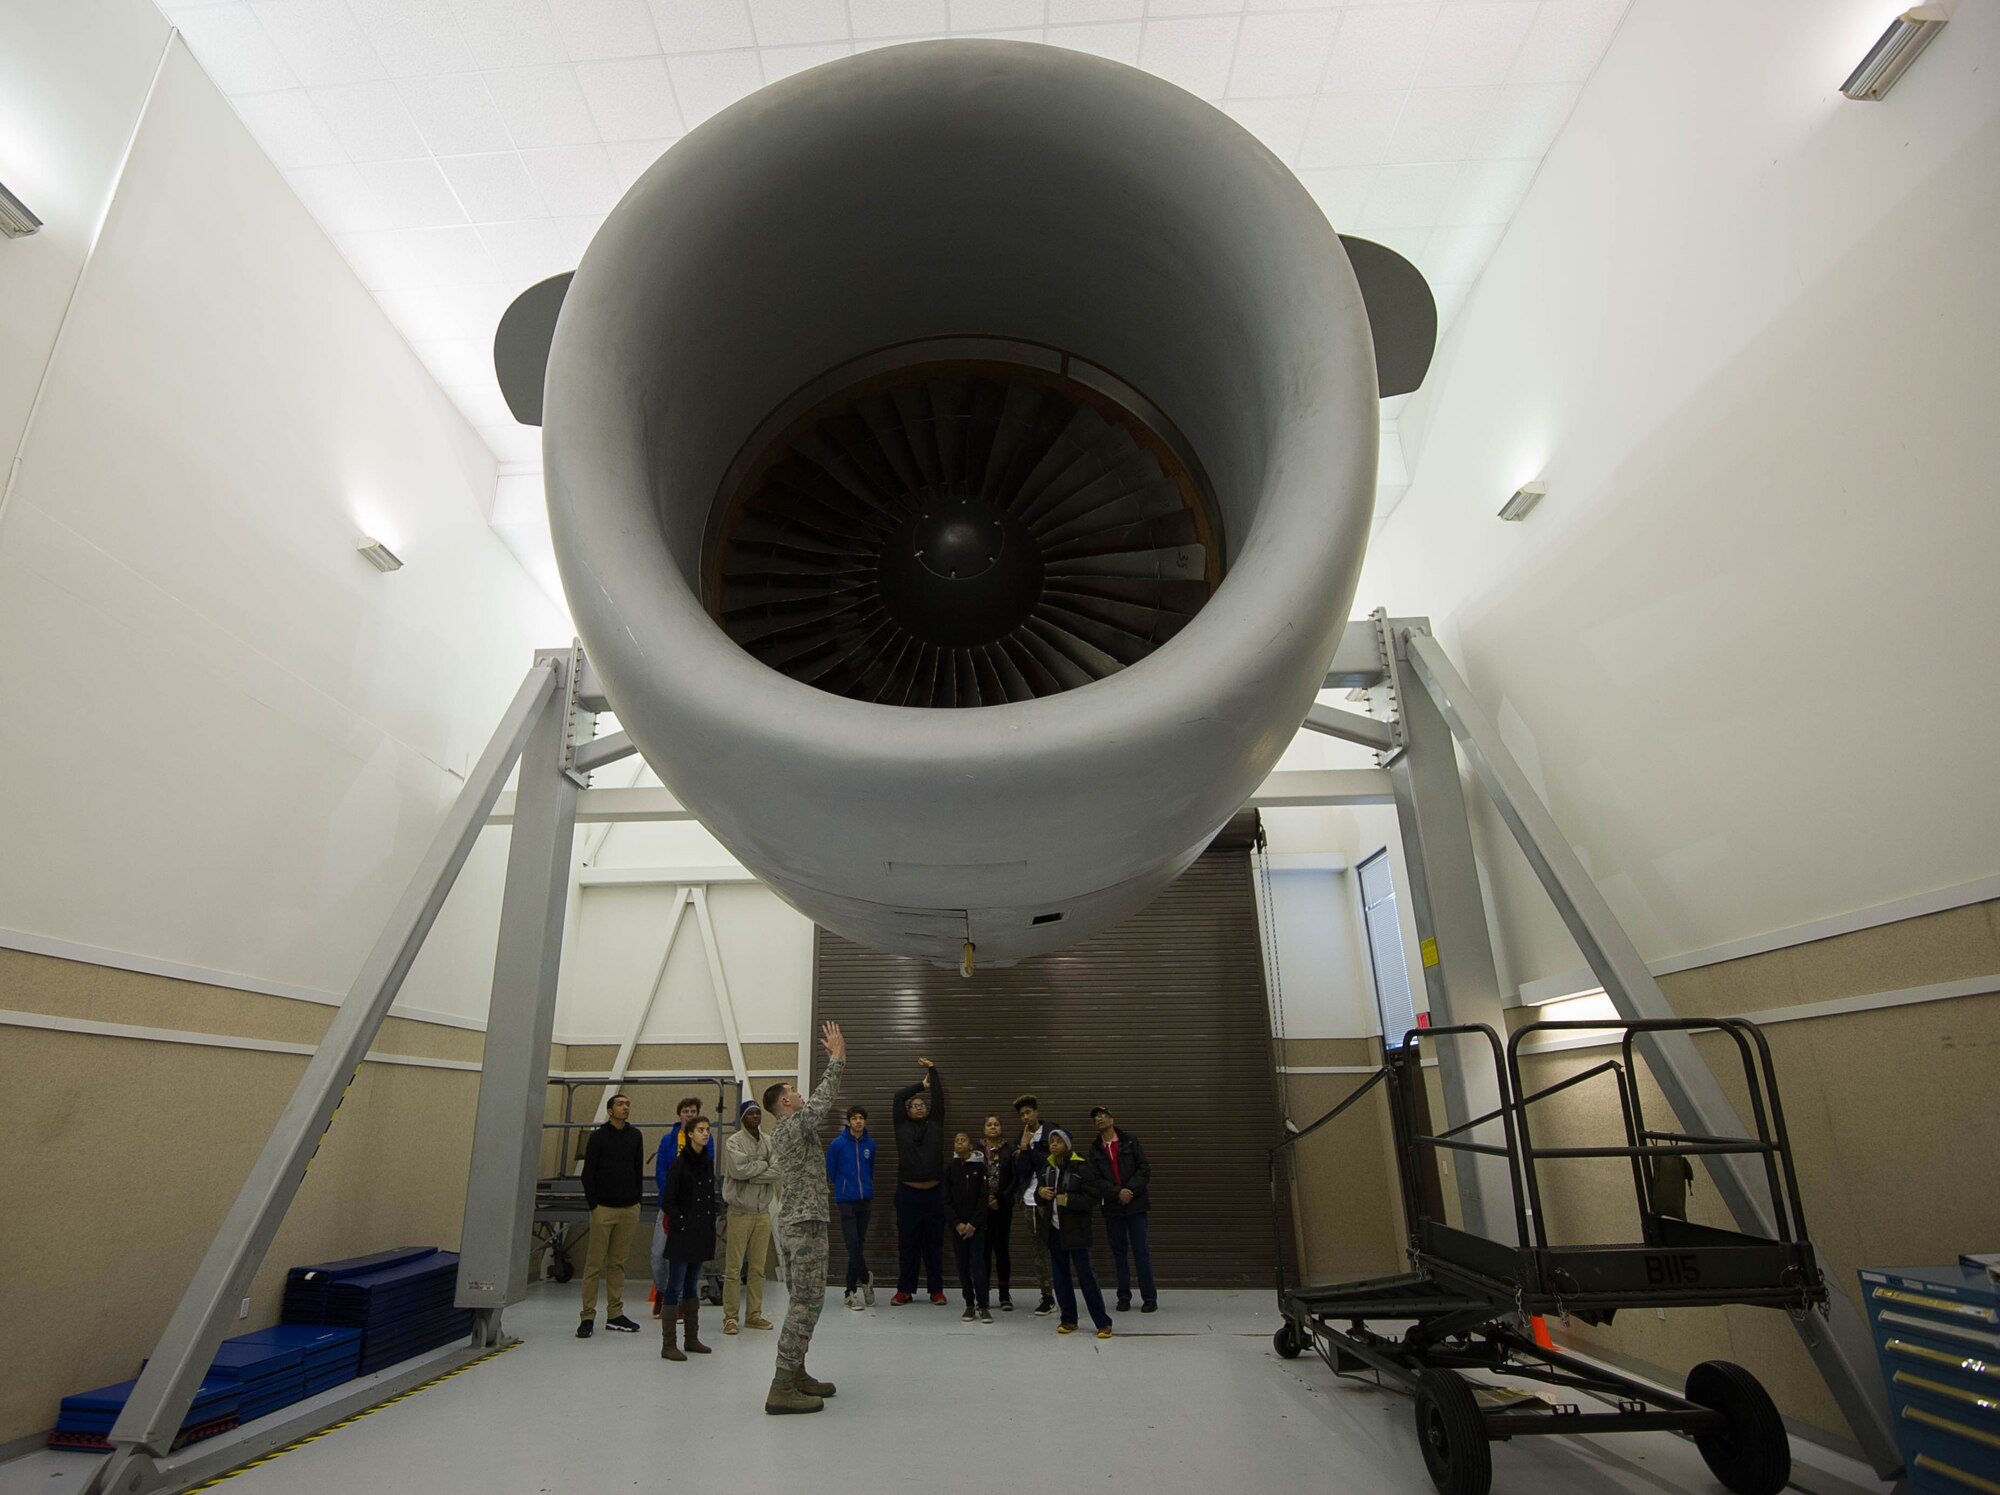 Tech. Sgt. Nathan Gardner discusses a C-17 Globemaster III engine with students from the Red-Tailed Hawks FlyingvFeb. 11, 2017, on Joint Base Lewis-McChord, Wash. Gardener is an instructor with the 373rd Training Squadron, Detachment 12, whose parent unit is located at Sheppard Air Force Base, Witchita Falls, Texas. (U.S. Air Force photo by David L. Yost)